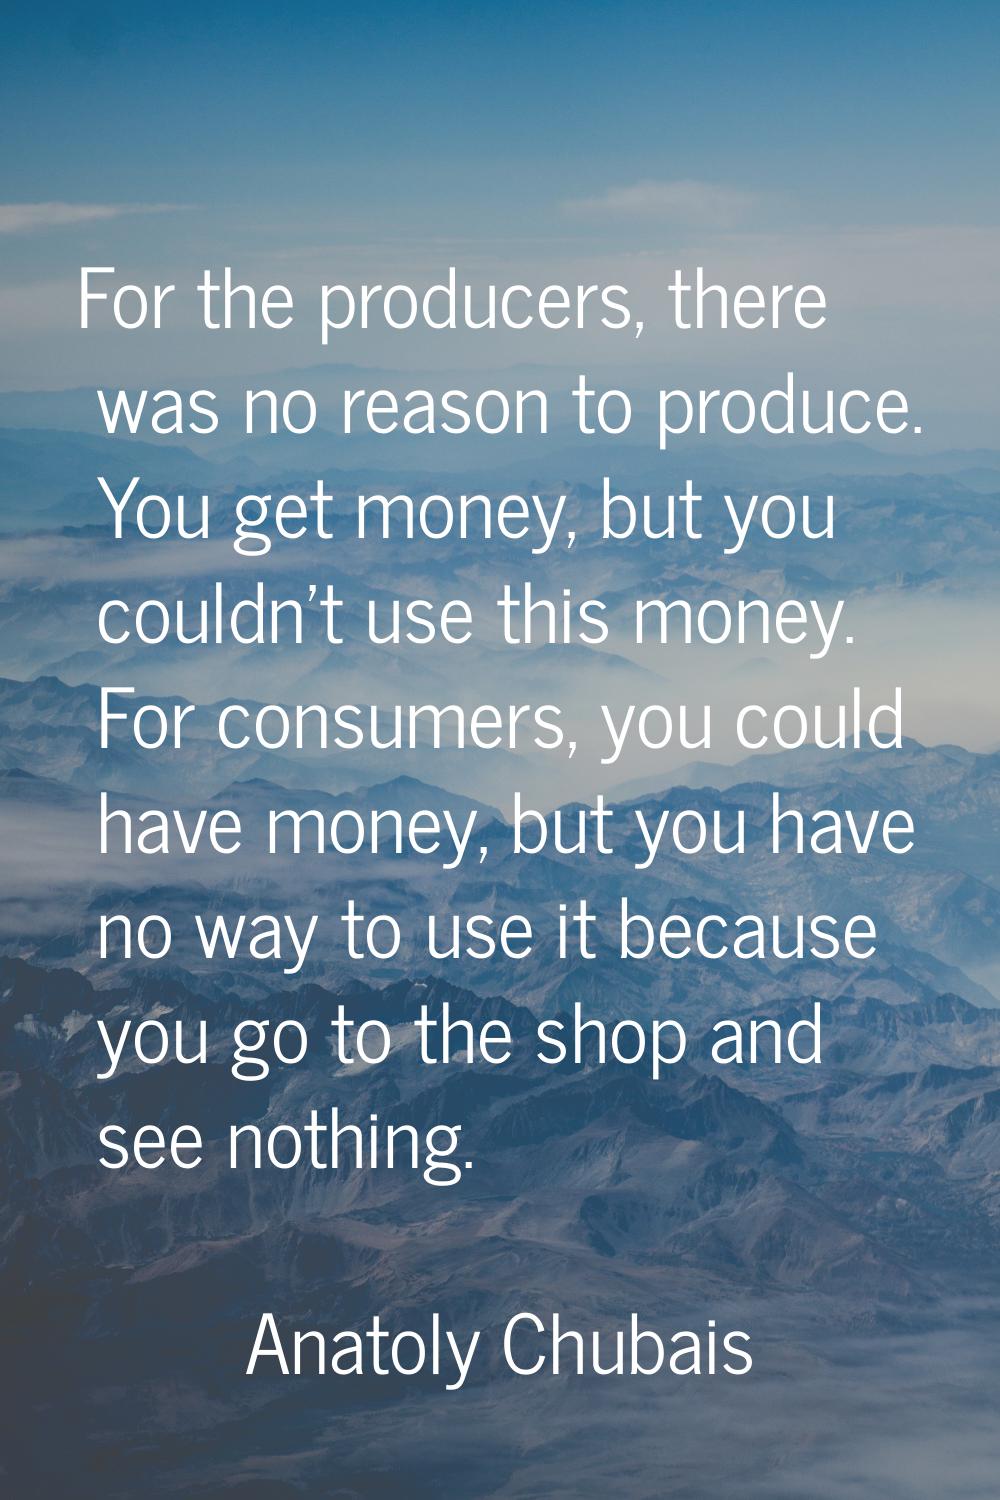 For the producers, there was no reason to produce. You get money, but you couldn't use this money. 